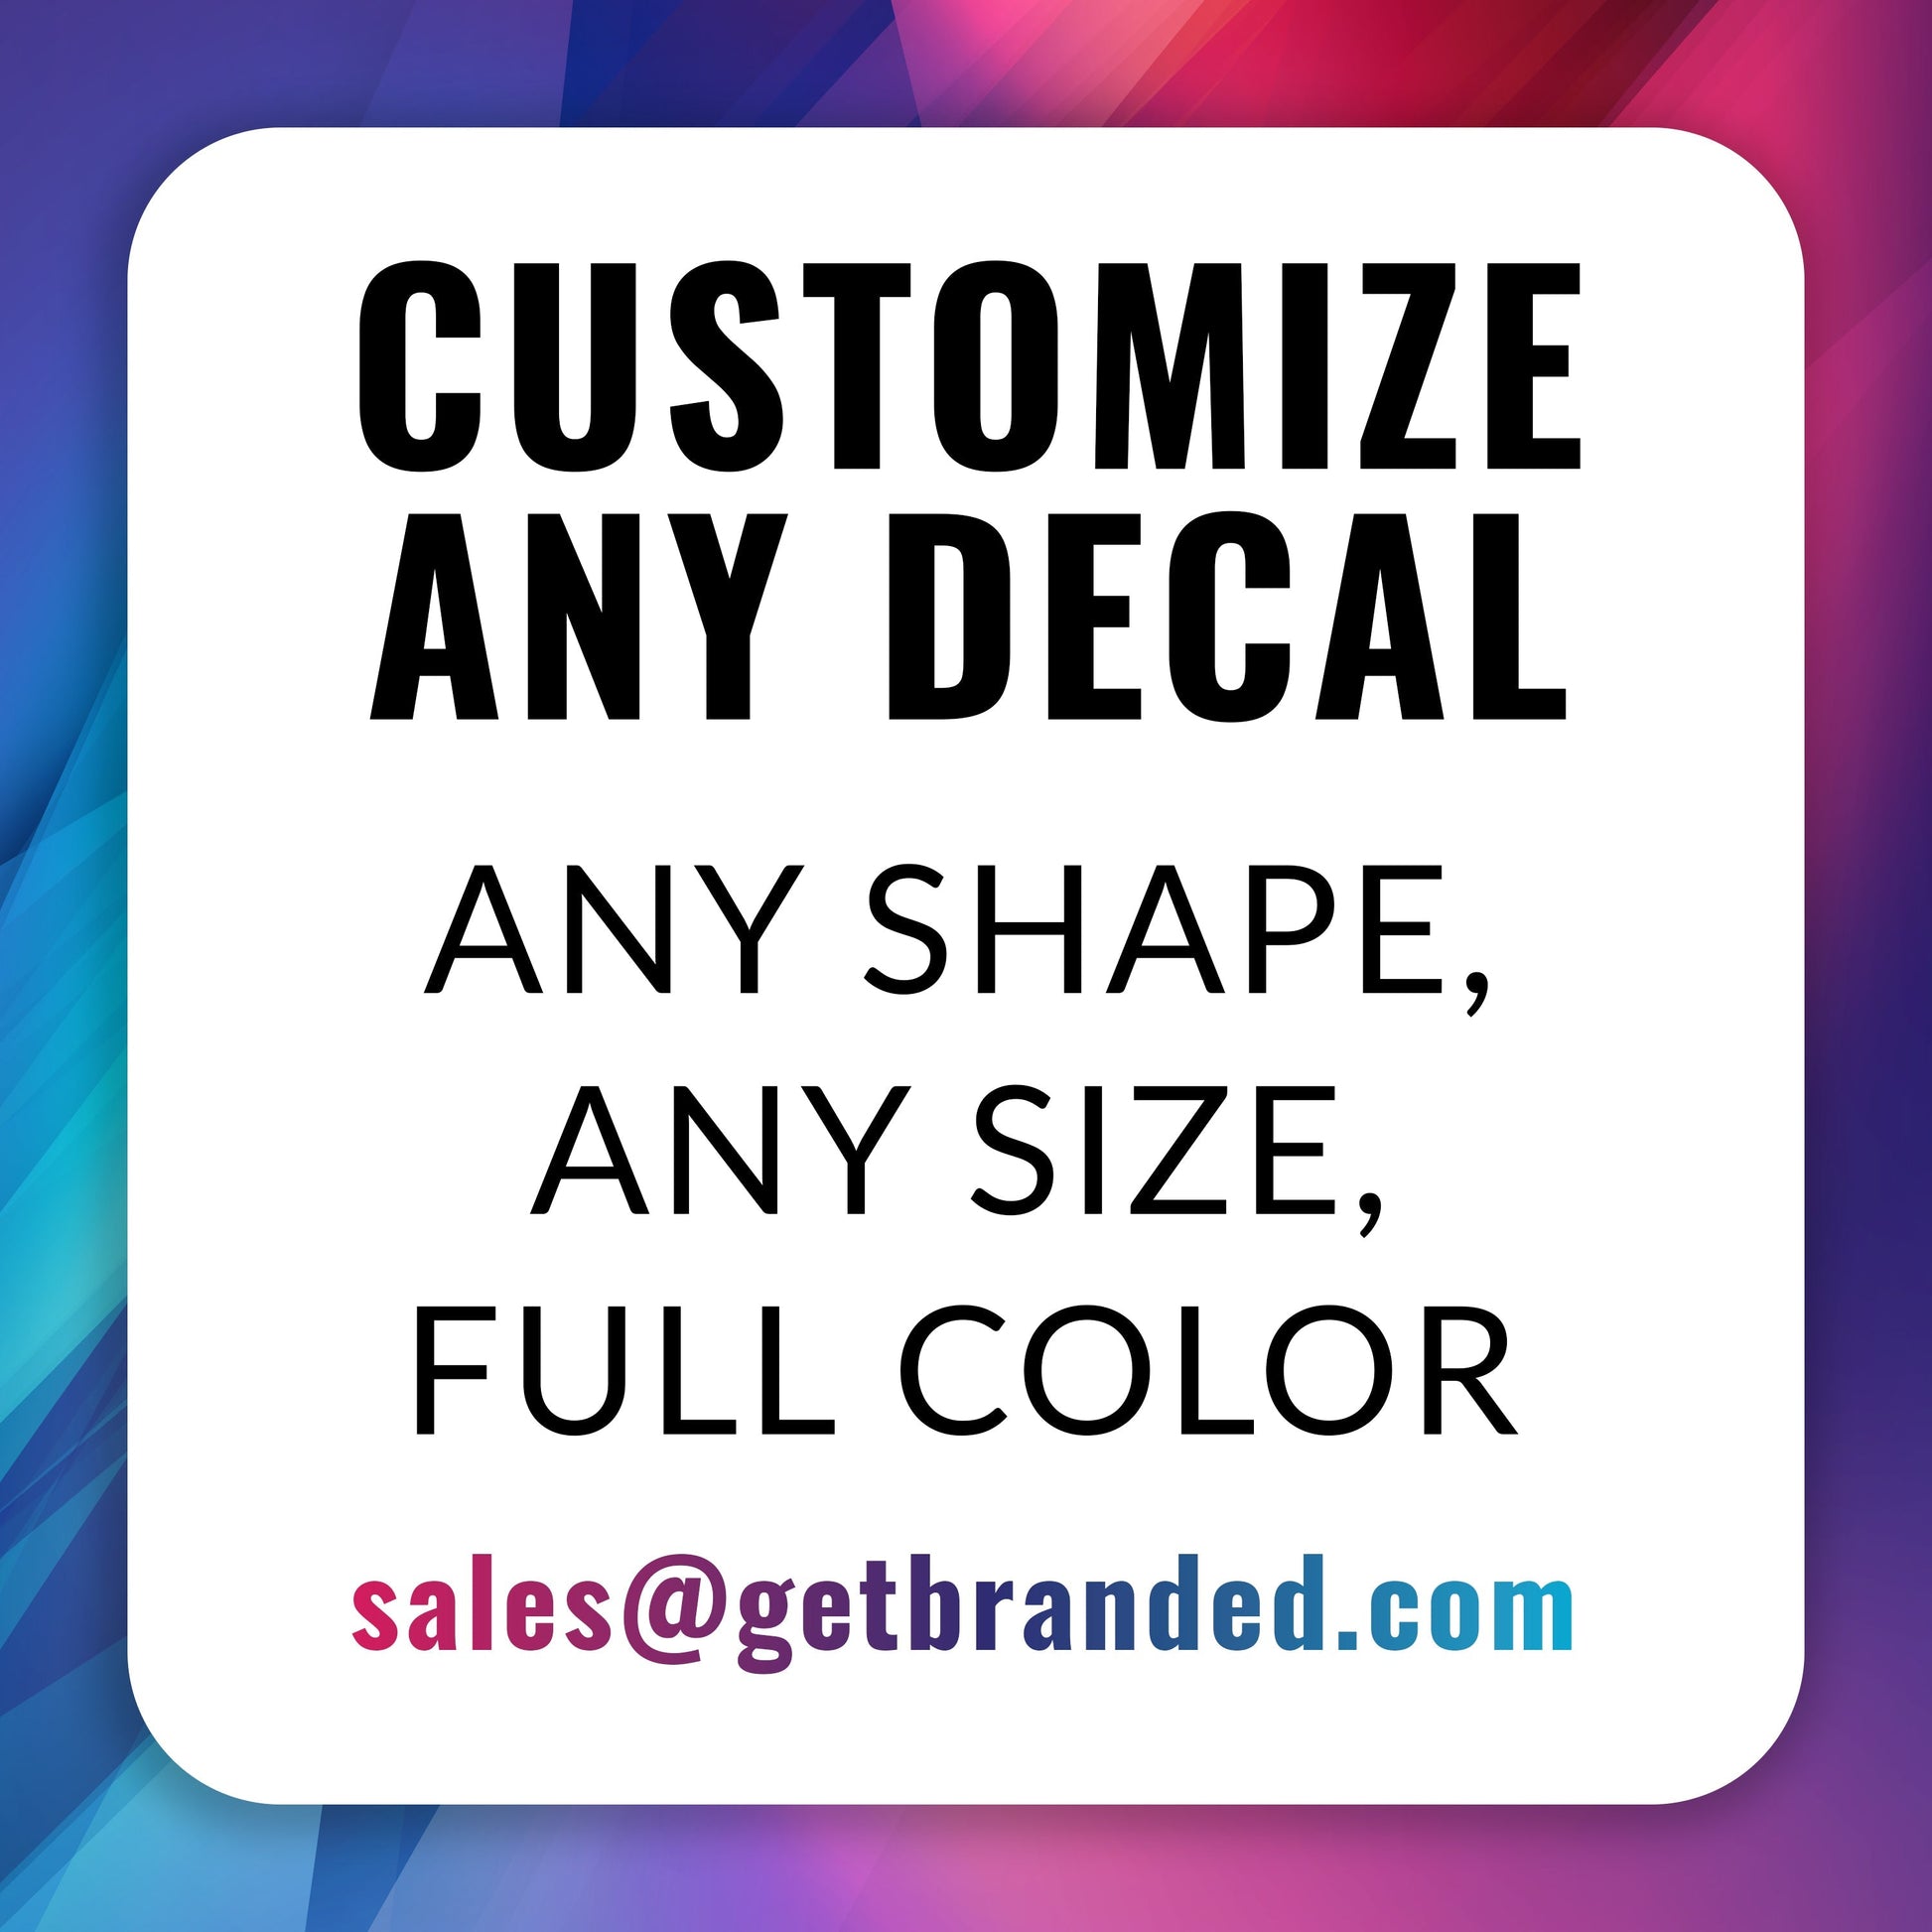 Customize any decal. You can have any shape, any size, and full color.